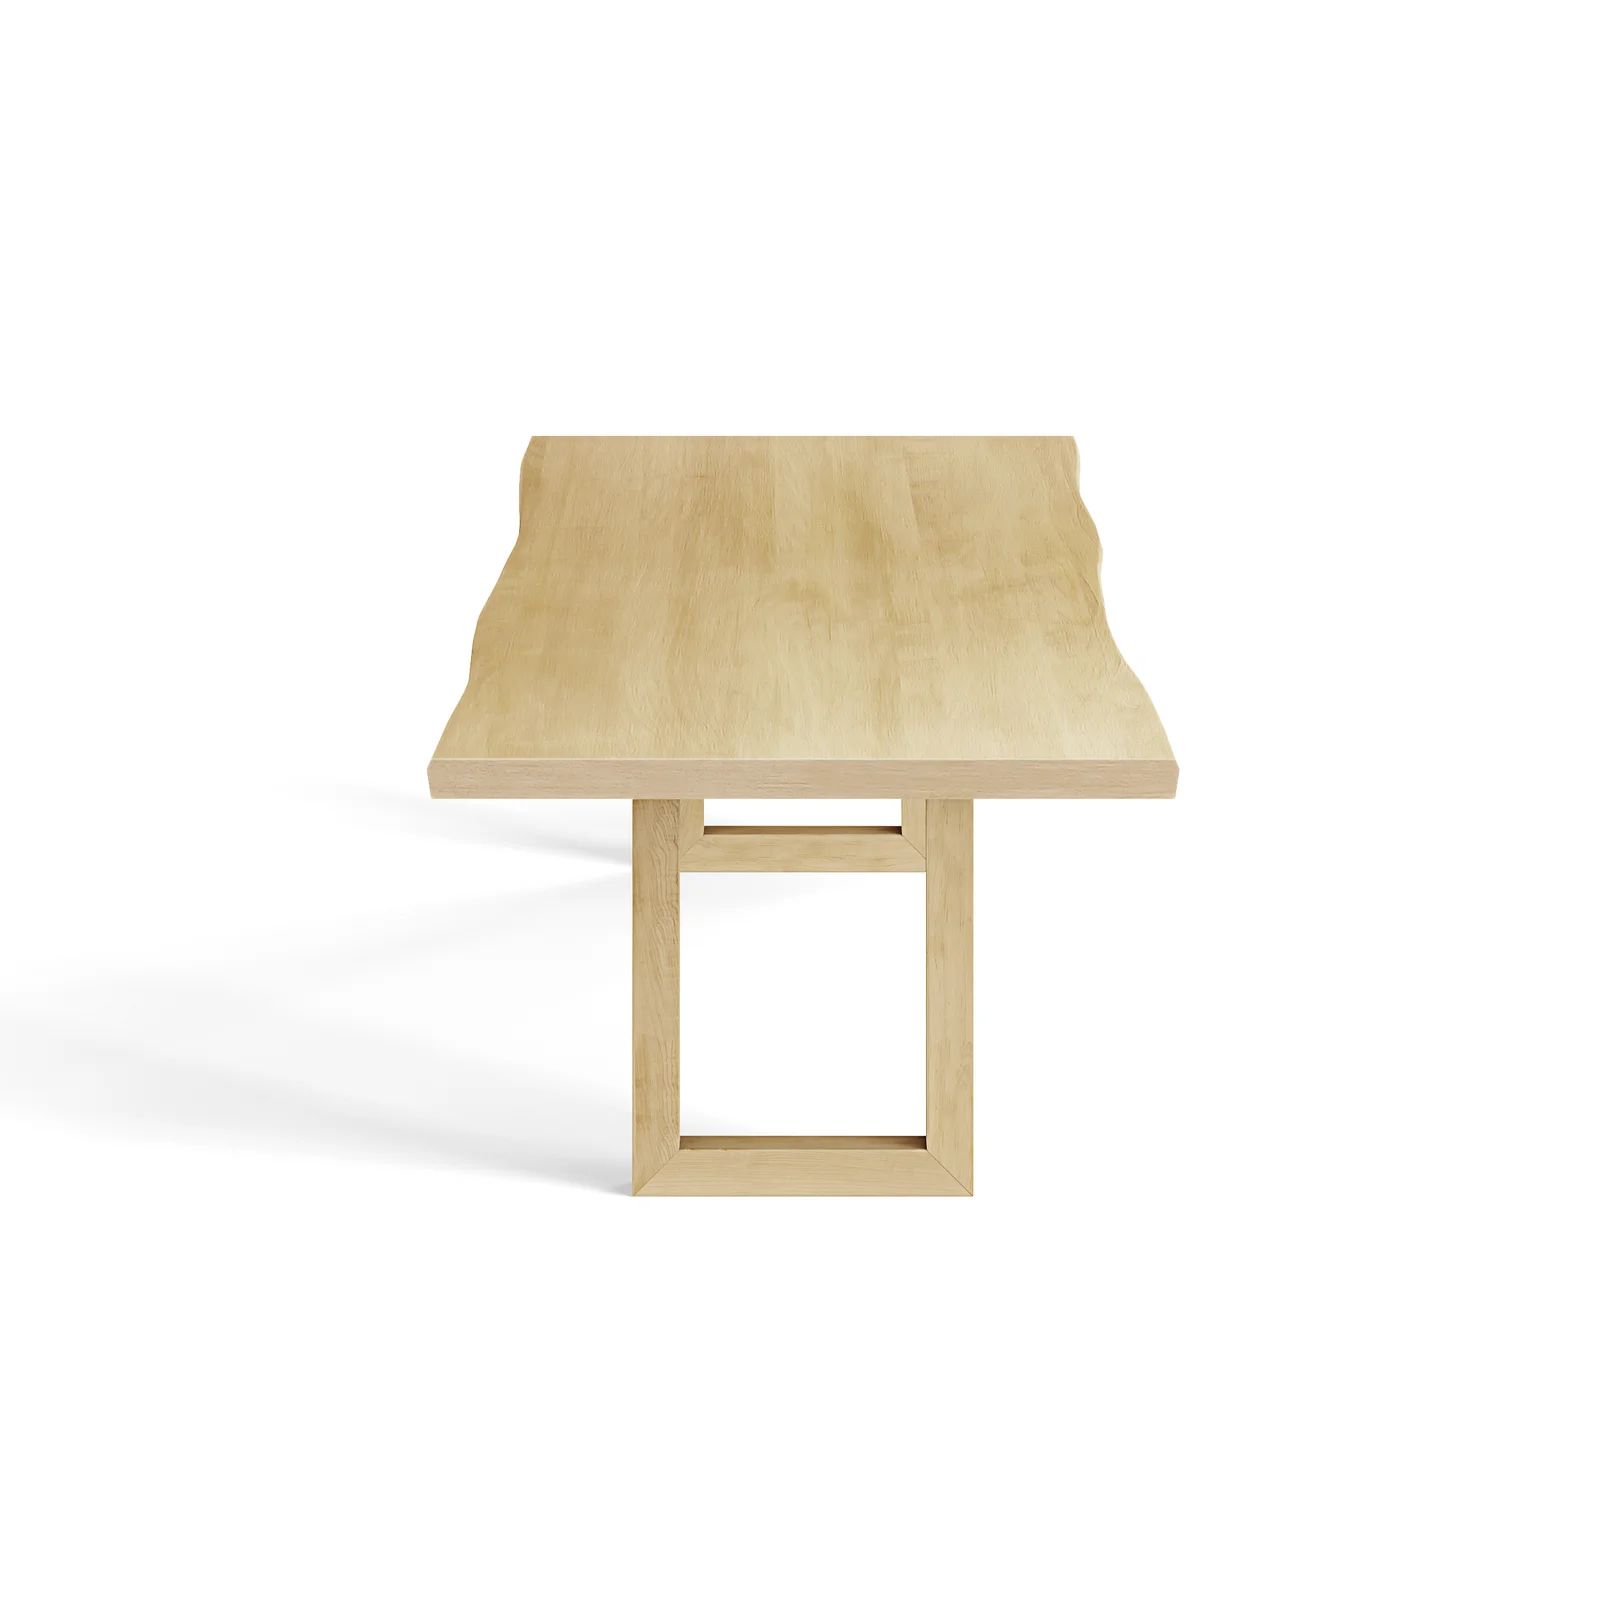 Fusco Sculpted Edge Solid Wood Dining Table | Wayfair Professional